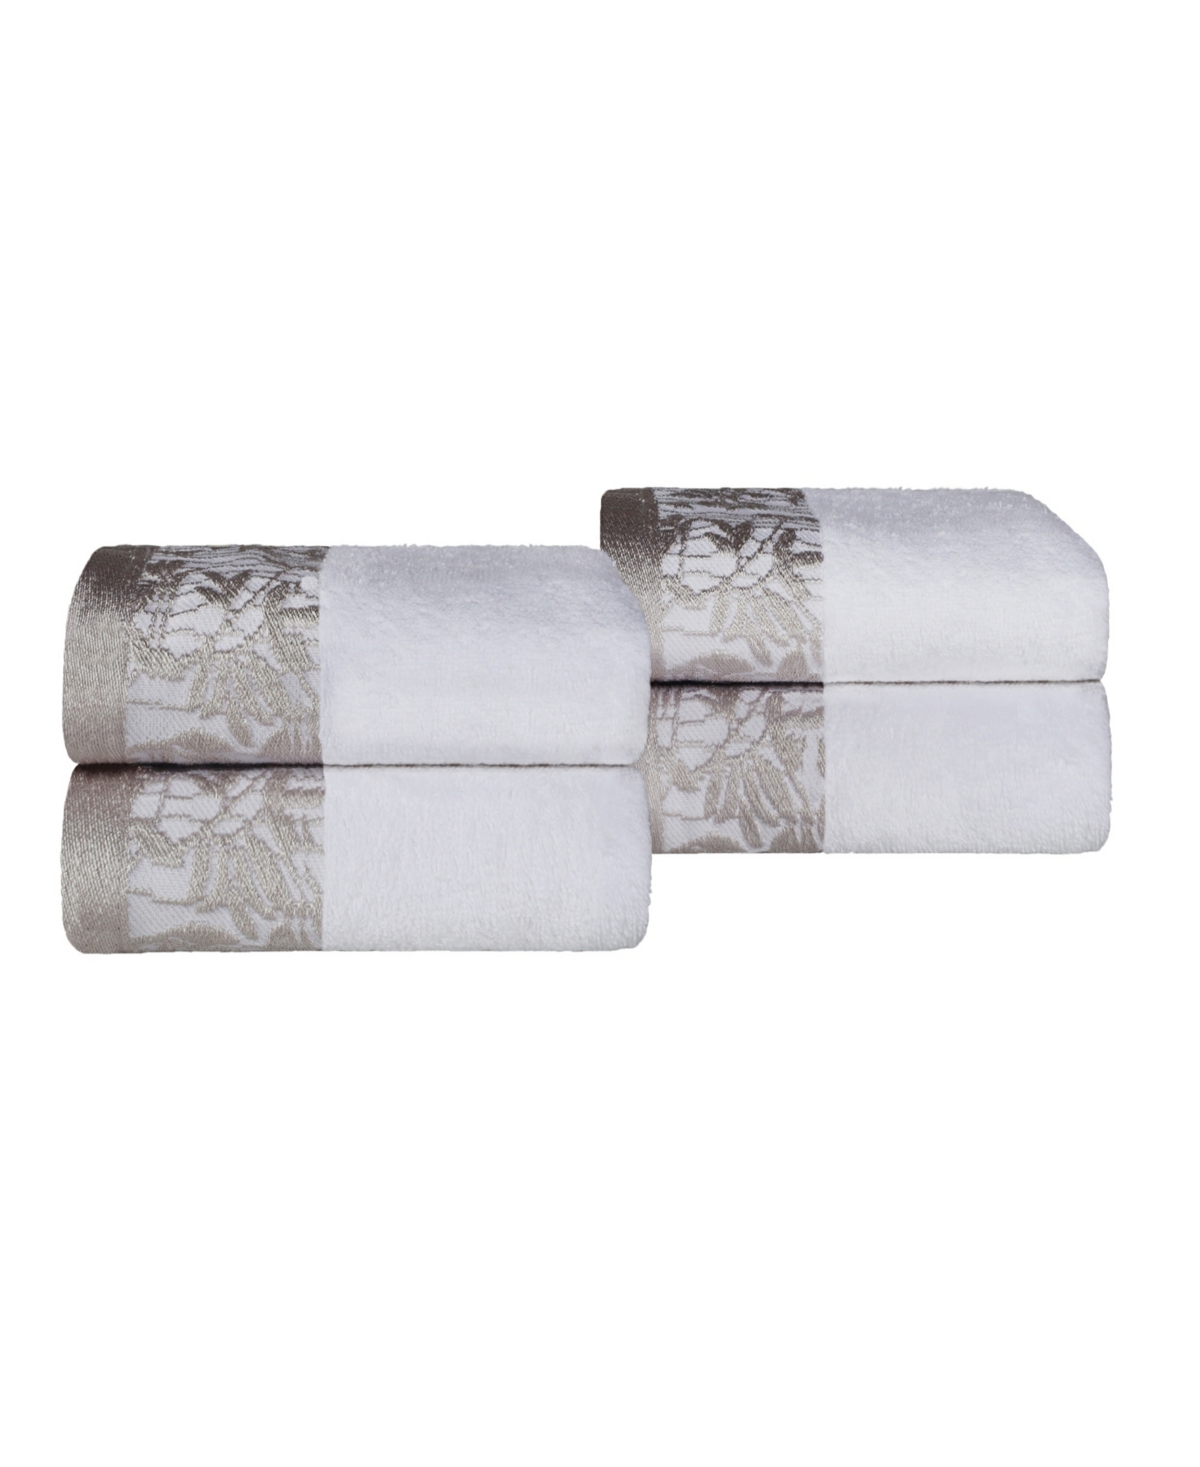 Superior Wisteria Floral Embroidered Jacquard Border Cotton Hand Towel Set, 4 Pieces In White